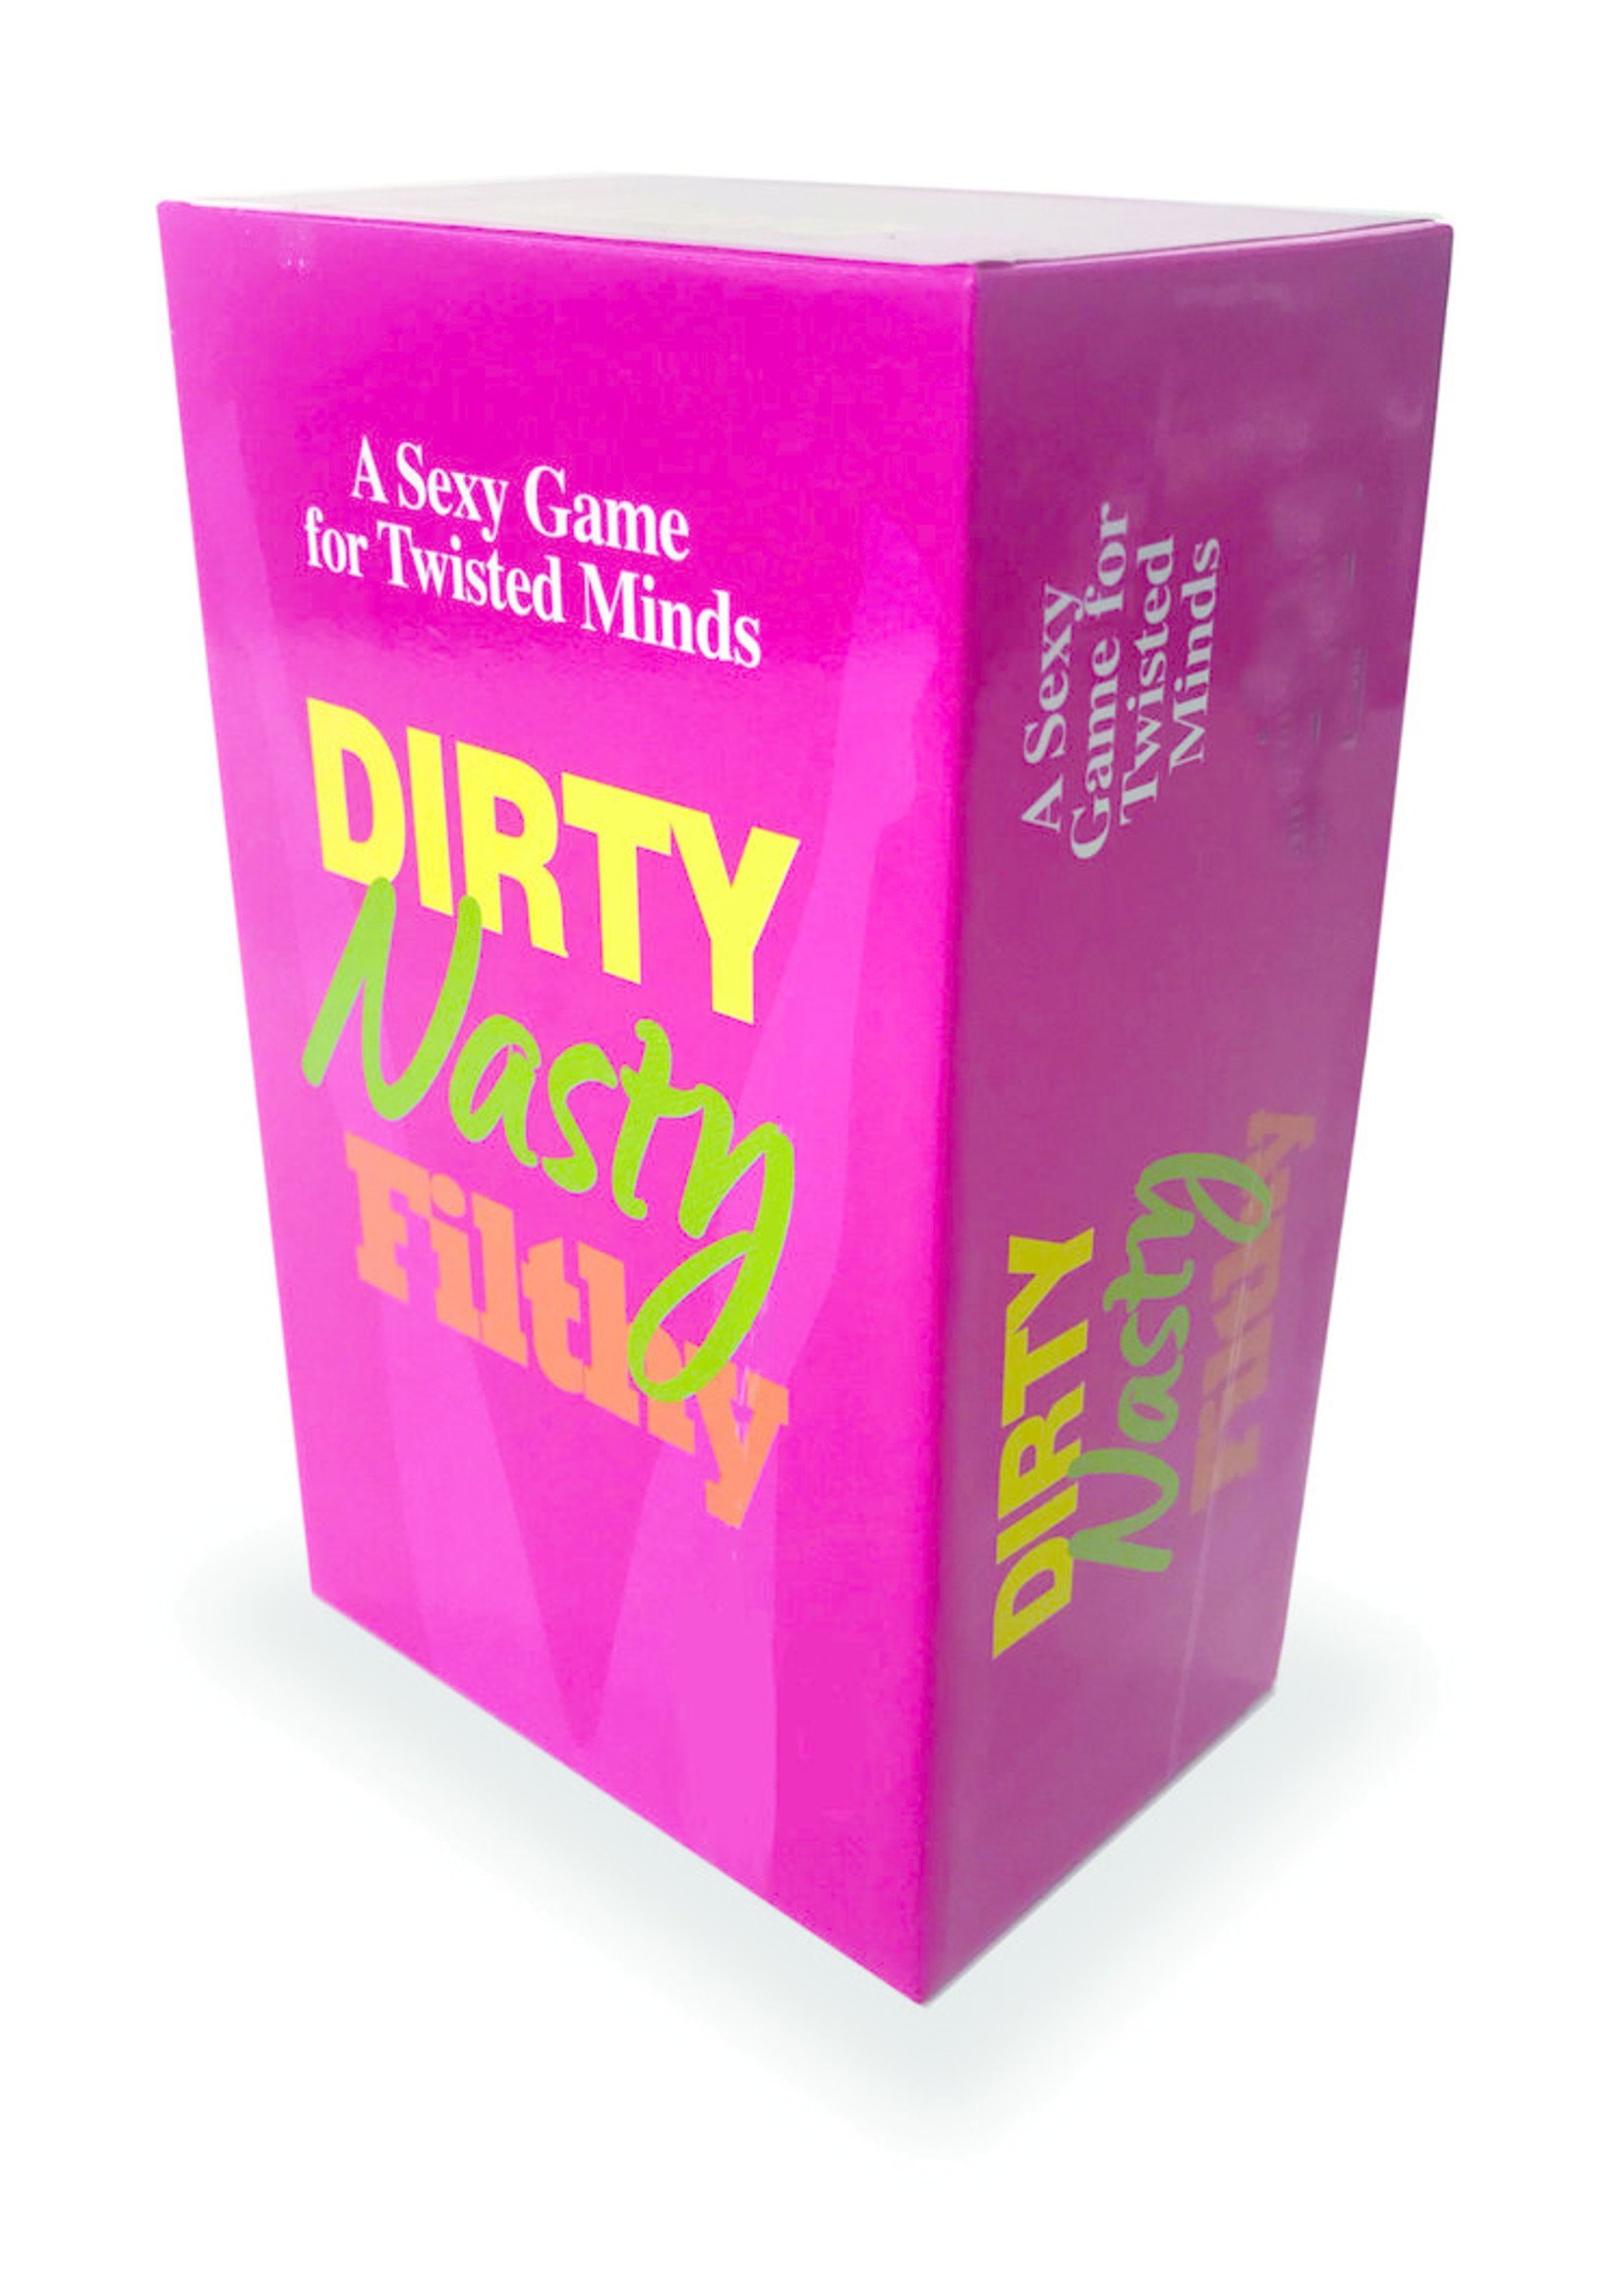 DIRTY NASTY FILTHY GAME - Party On!